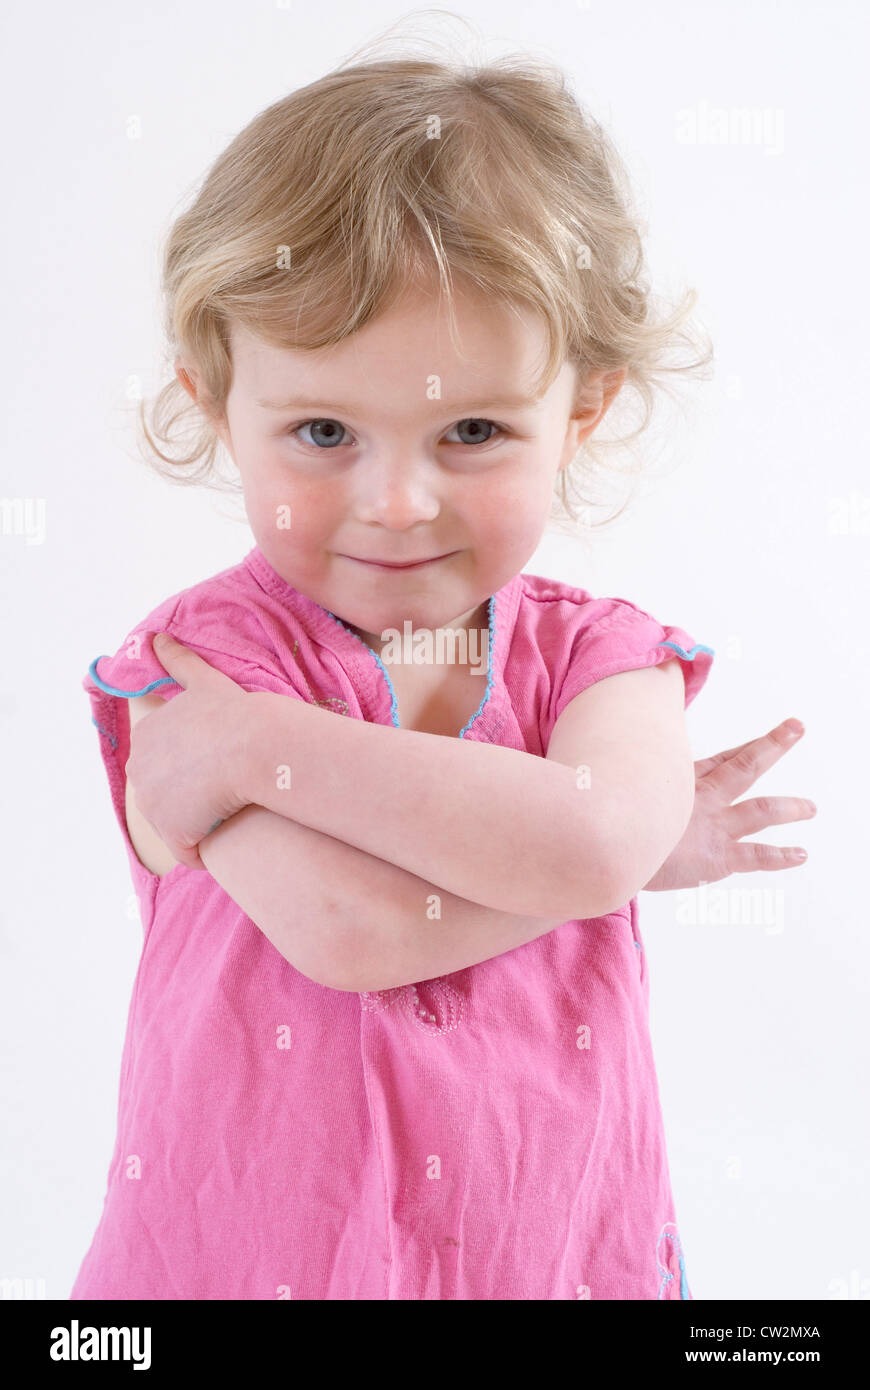 Cute Little Girl Posing with Arms Crossed in Slightly Street Gangsta Style, Studio Portrait Isolated on White Stock Photo